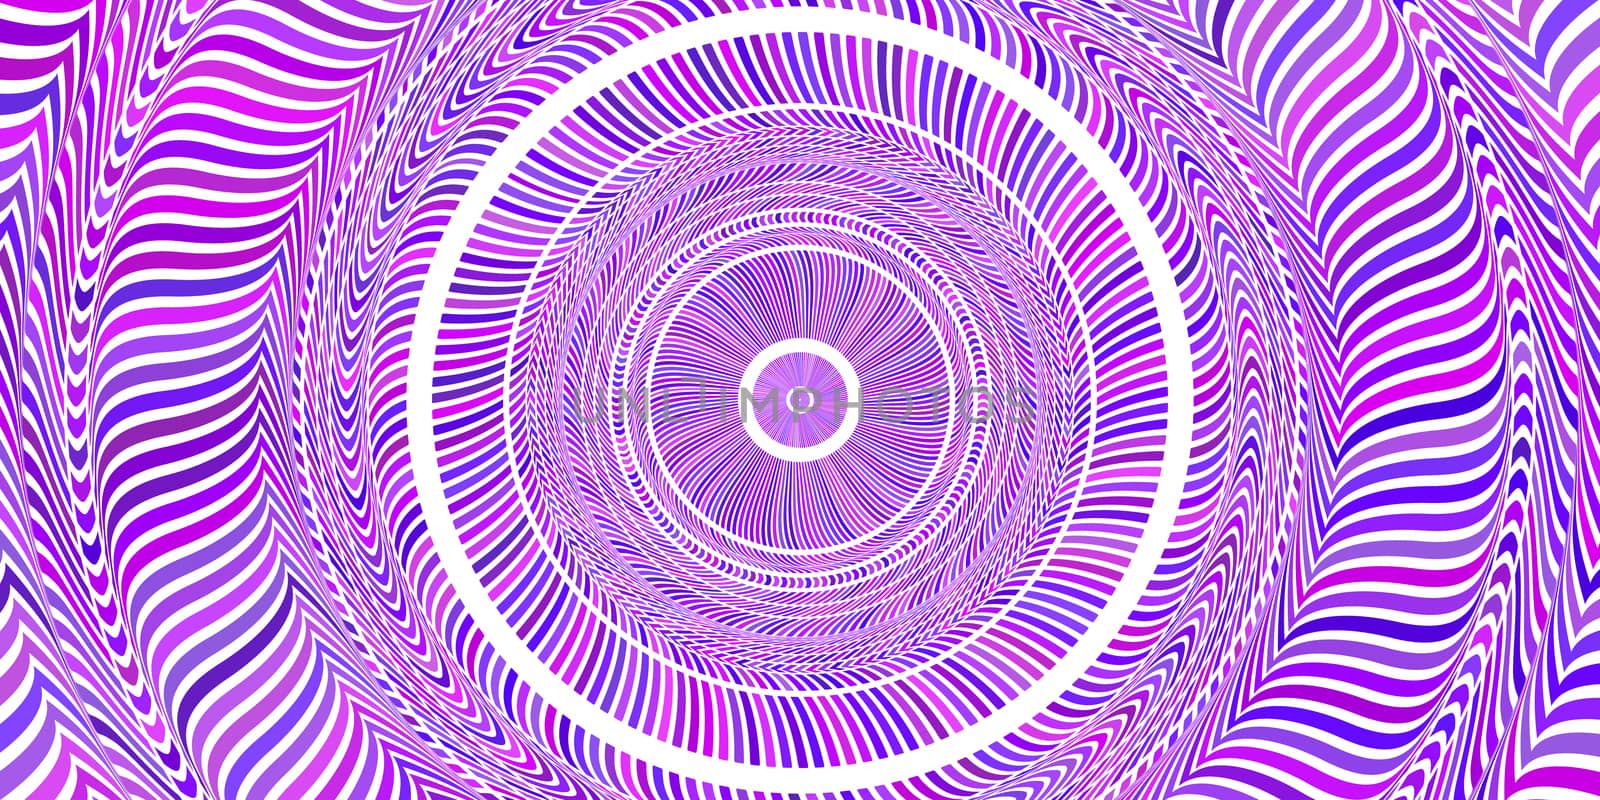 Lilac Circles Art Action Background. Round Wheel Rhythm Backdrop. Center Concept. by sanches812